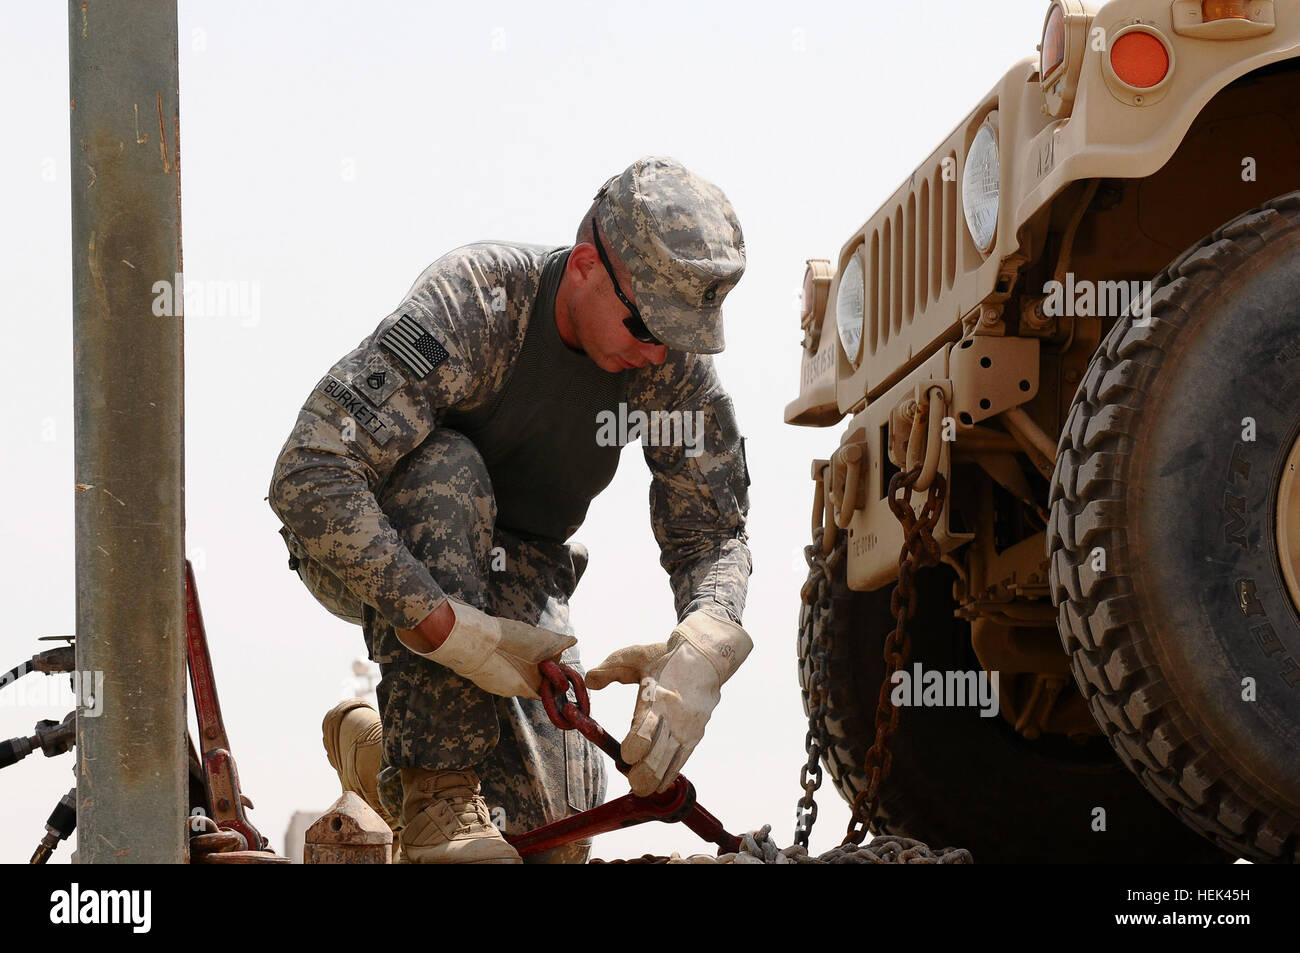 Staff Sgt. Jeremy Burkett, motor vehicle operator, 2101st Transportation Company, 541st Combat Sustainment Support Battalion, 3rd Sustainment Brigade, 13th Sustainment Command (Expeditionary) and a native of Brundidge, Ala., adjusts chains used to securely fasten a load to his truck, June 17, in the motor pool on Contingency Operating Base Speicher, Iraq. Celebrated Alabama unit rolls with tide of cargo 293752 Stock Photo